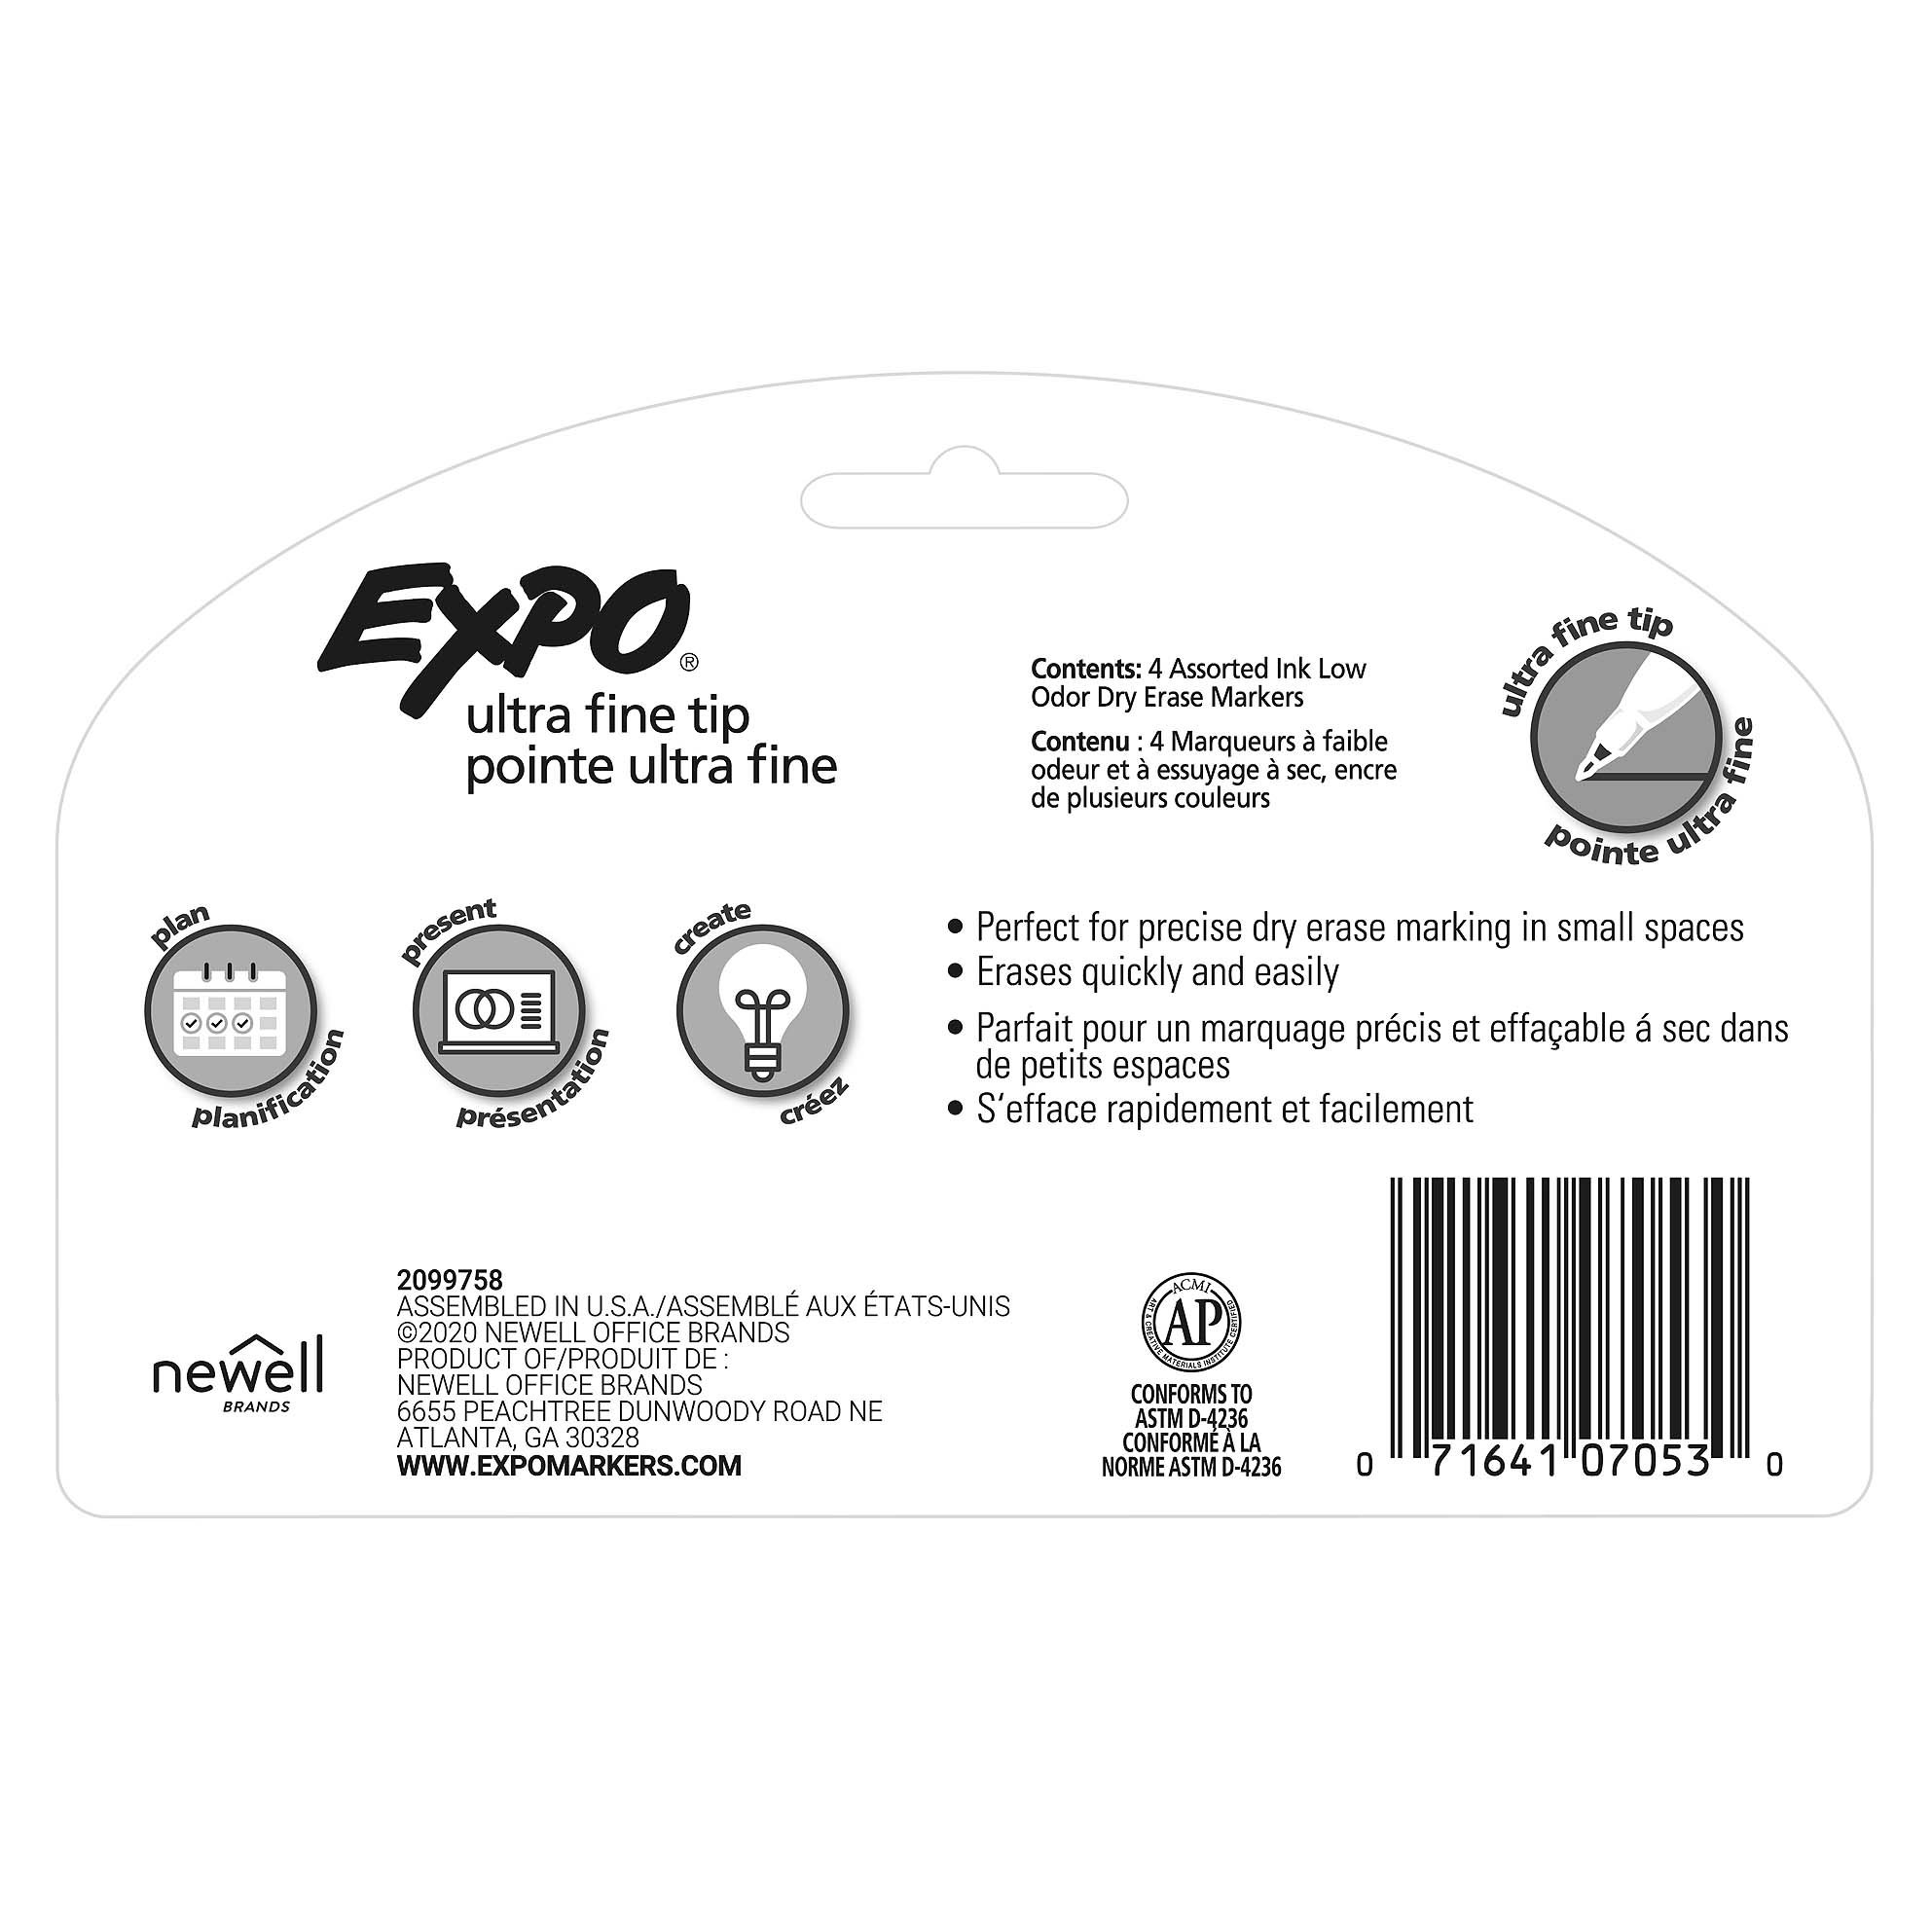 Expo Ultra Fine Tip Dry Erase Markers – Assorted Colors - Shop